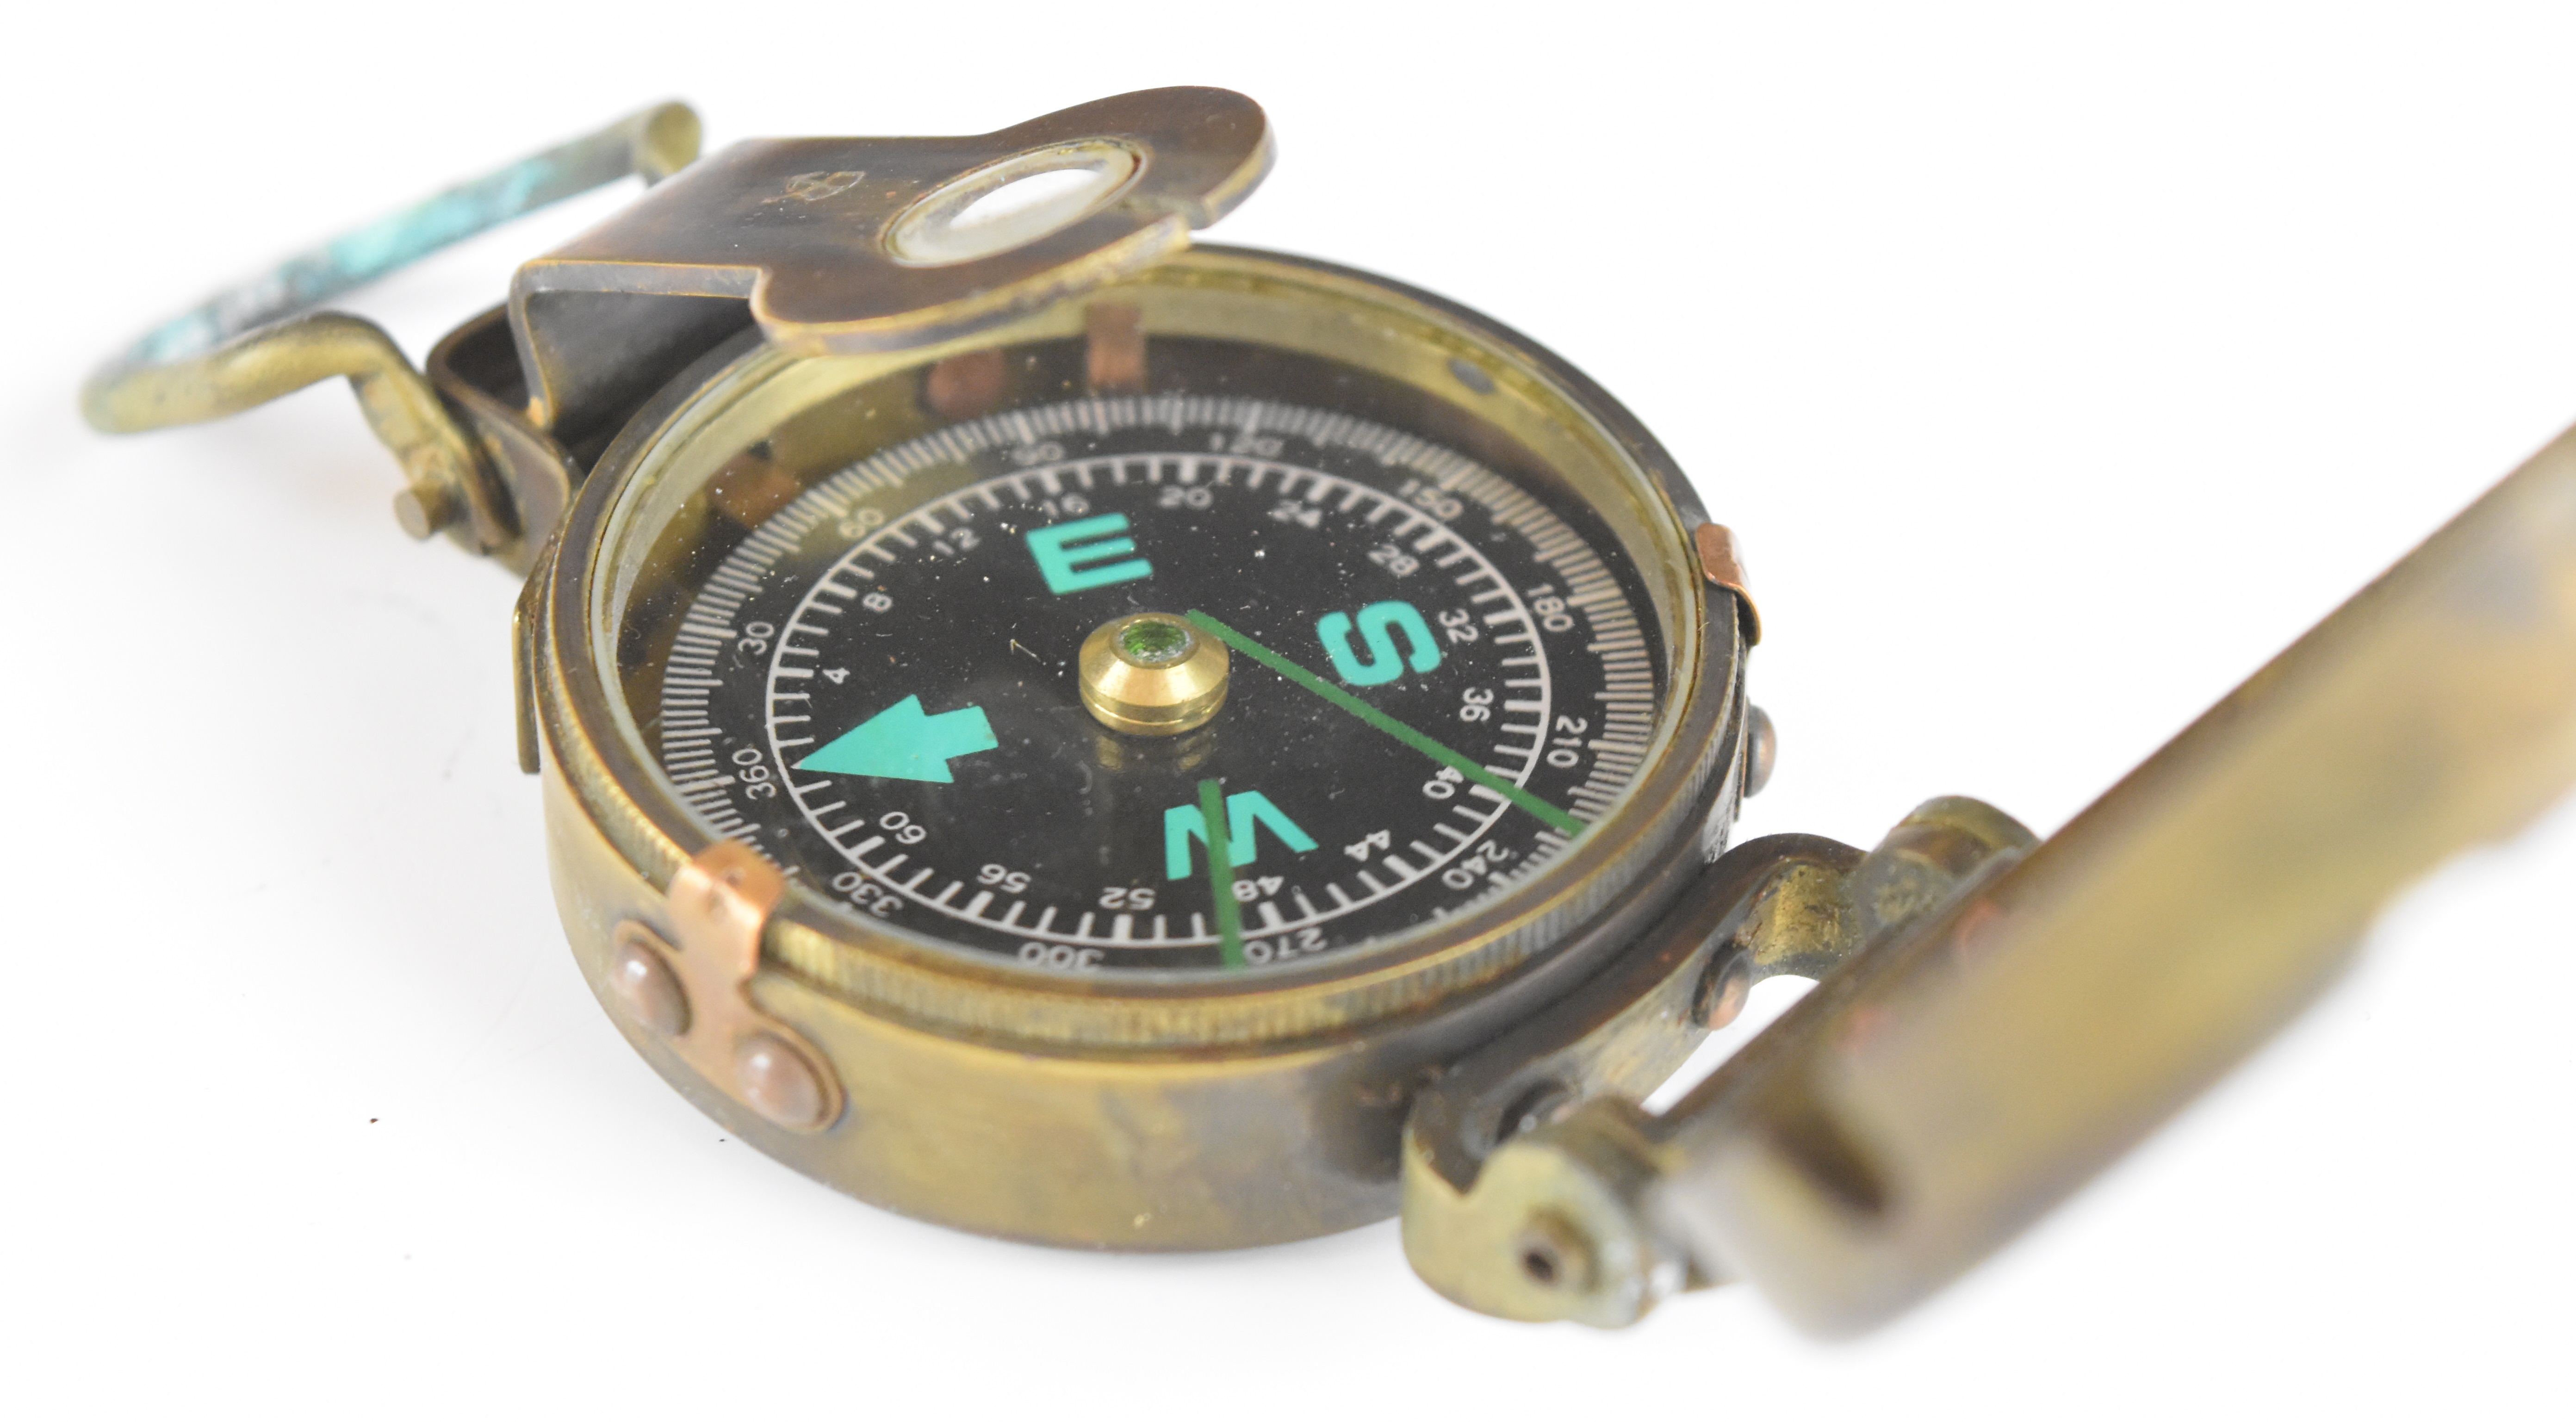 British WW2 prismatic compass by T G Co Ltd, London No B187104 1942 Mk III, with broad arrow mark, - Image 8 of 10